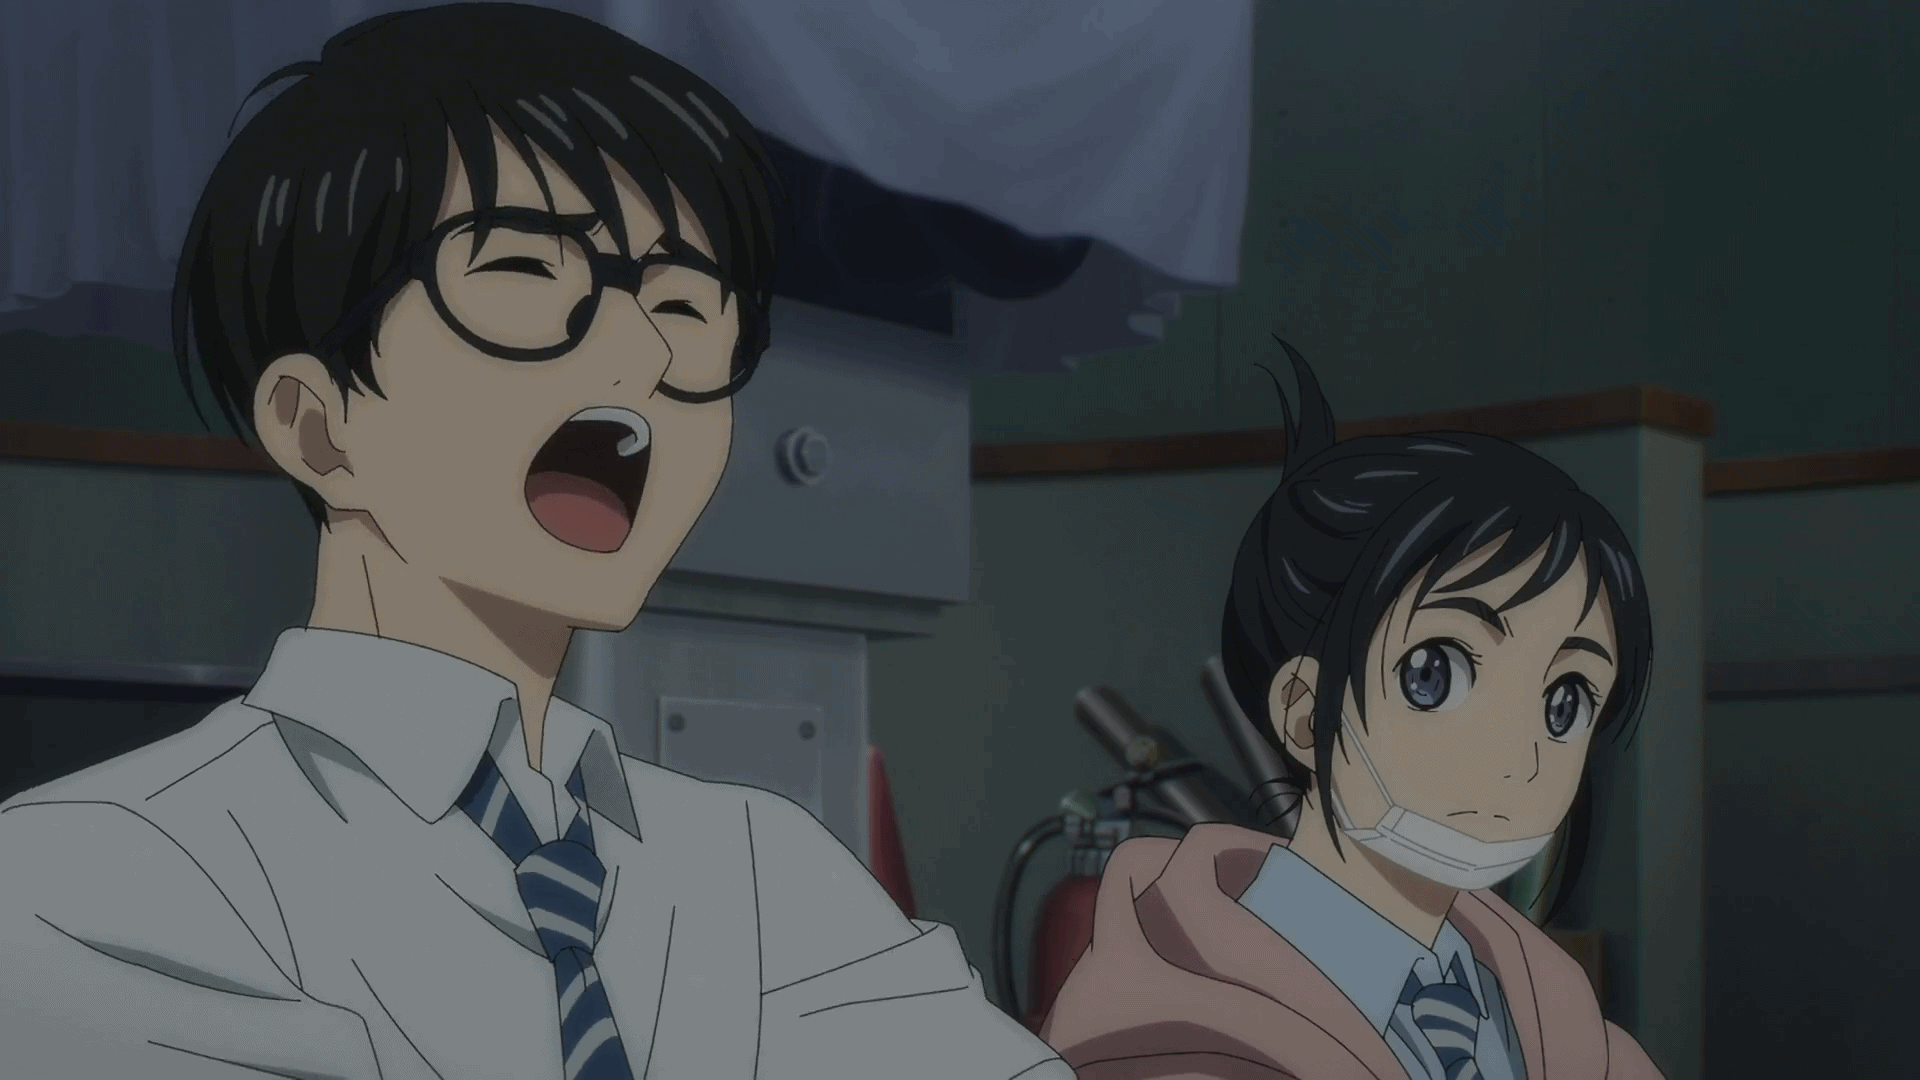 Insomniacs After School Episode 1 Review: Our Pretty Secret